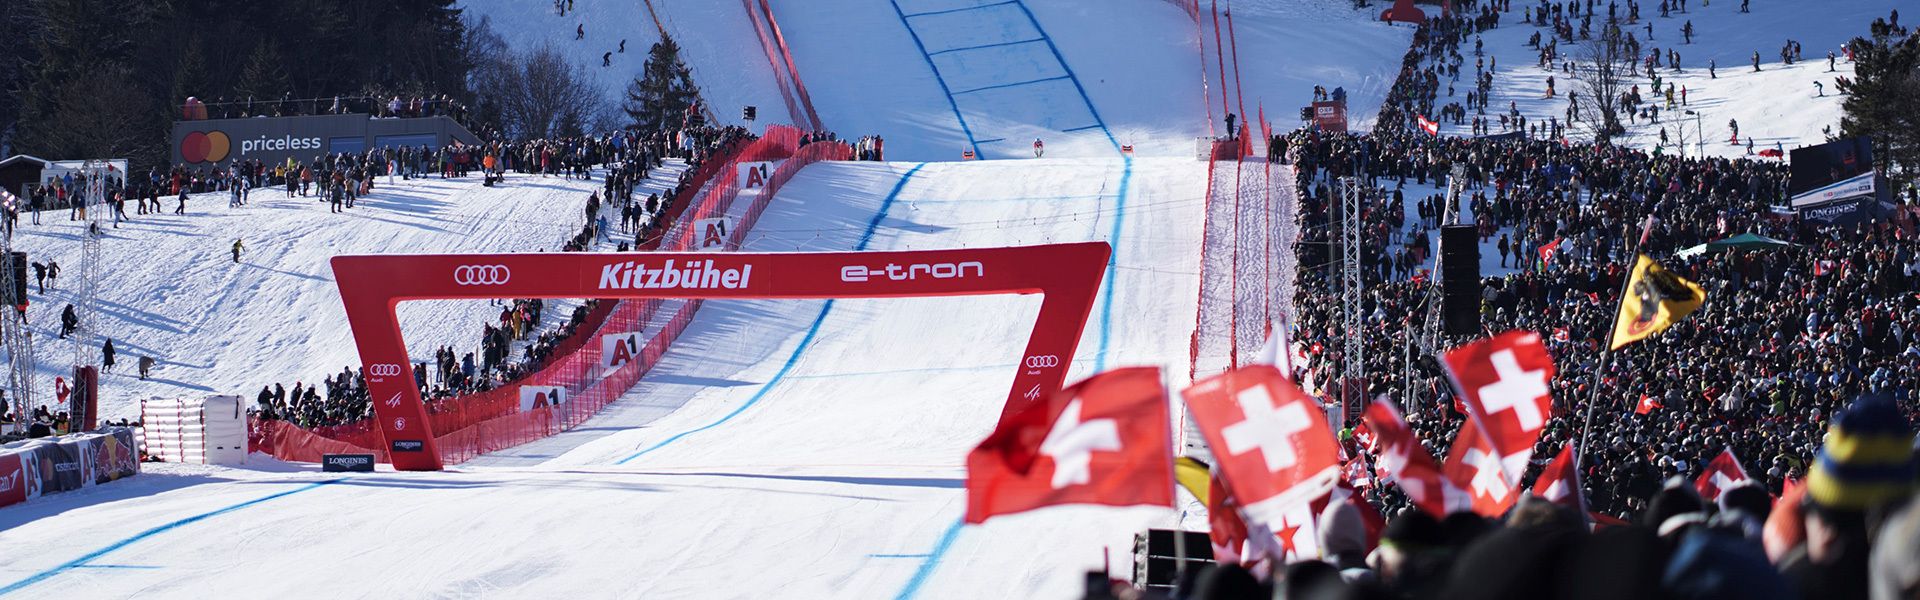 A skier shortly before crossing the finish line in Kitzbühel. An Audi logo and the words Kitzbühel and e-tron can be seen on the red finish arch.